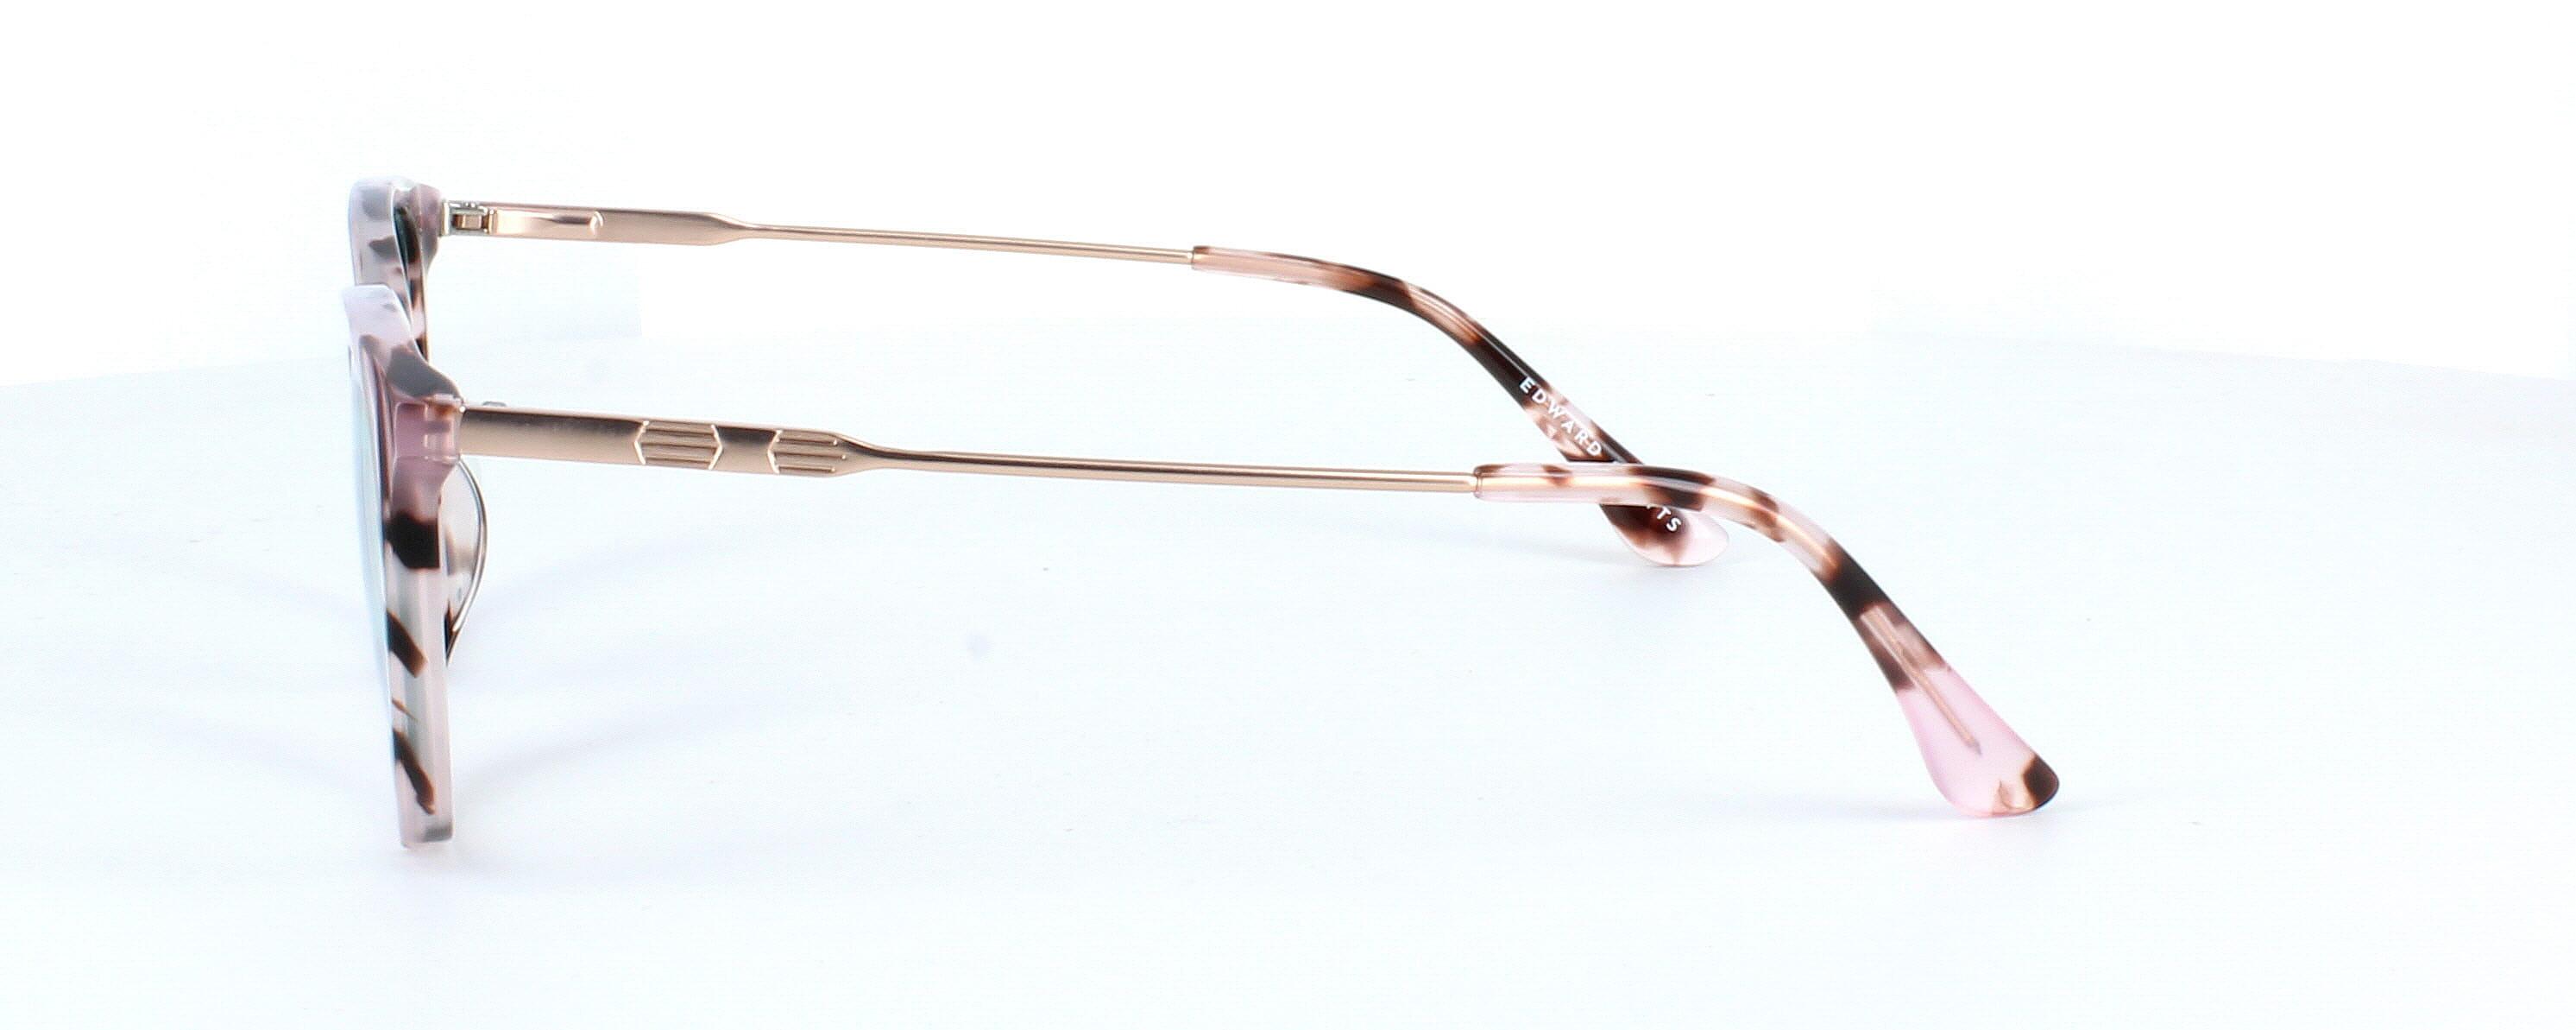 Edward Scotts BJ9202 C617 - Women's oval shaped shiny tortoise acetate glasses with gold metal spring hinged arms - image view 2